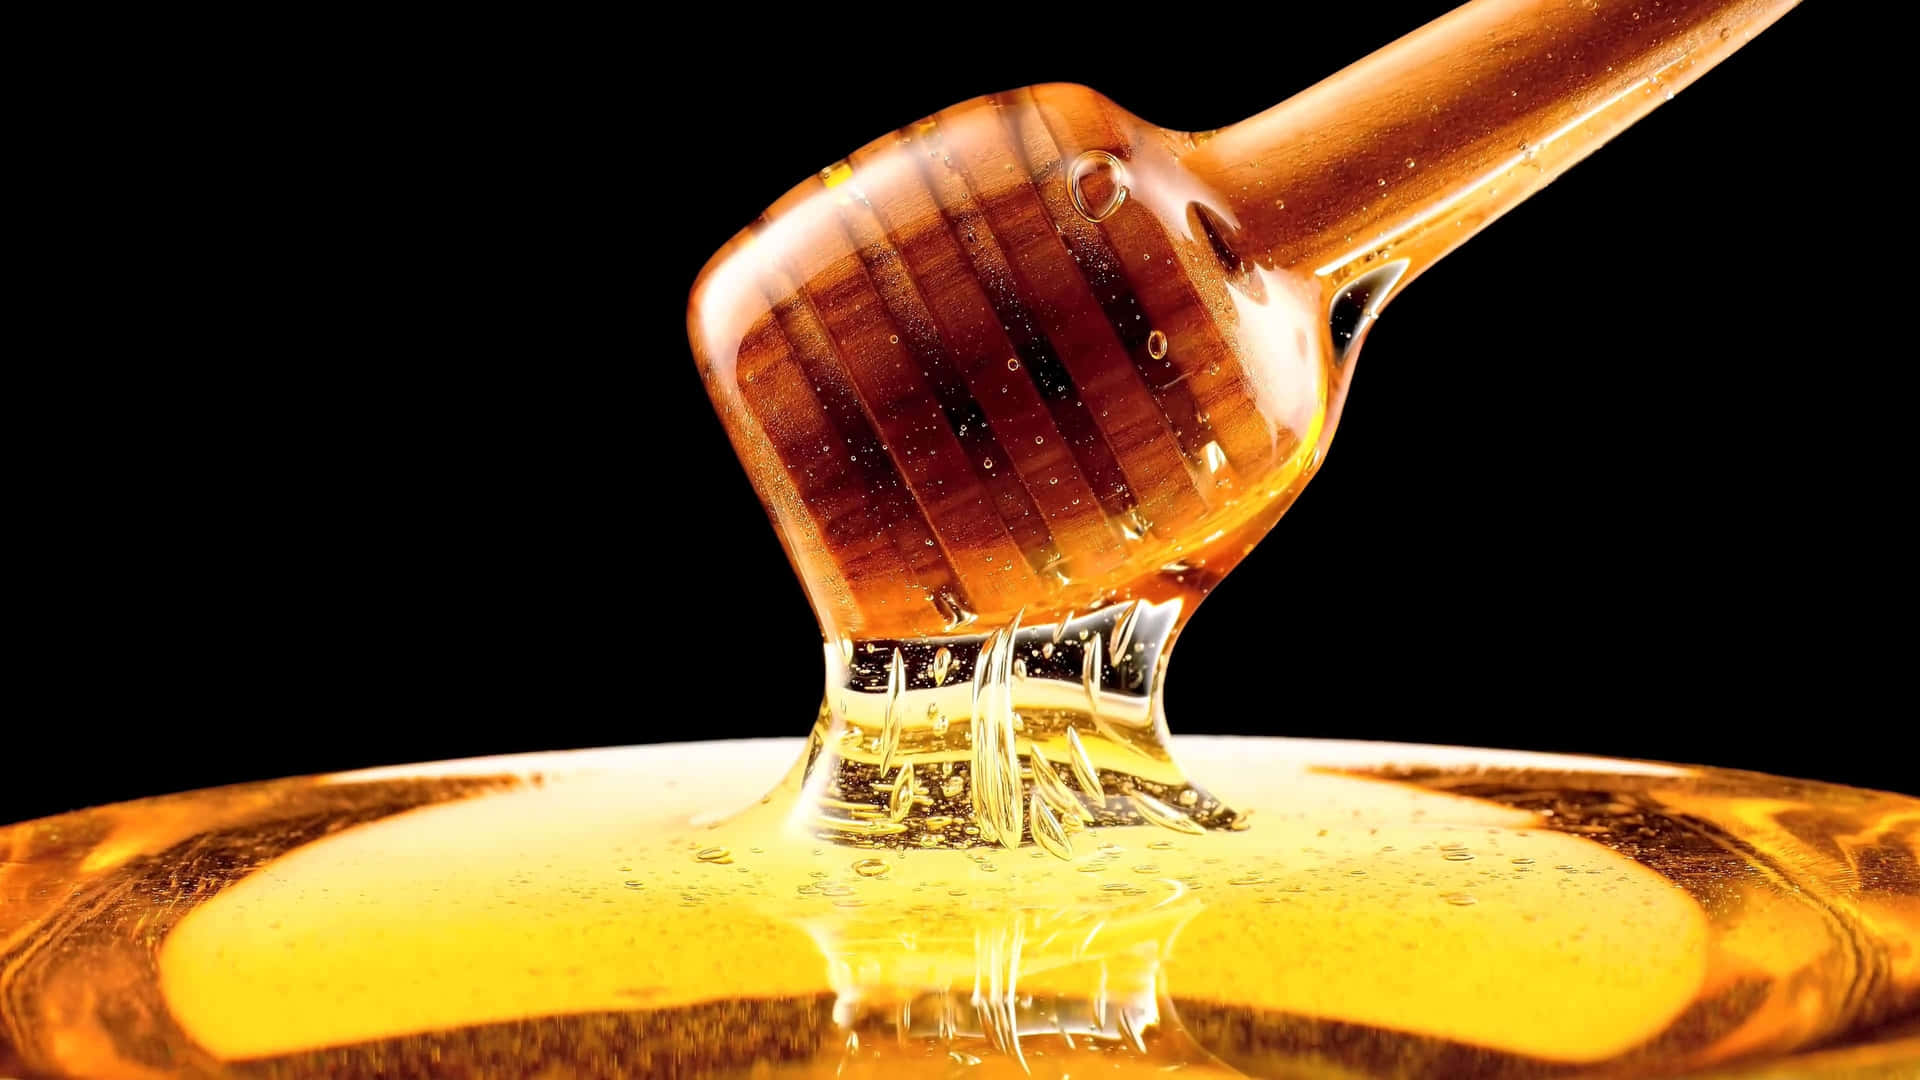 Honey Is Being Poured Into A Glass